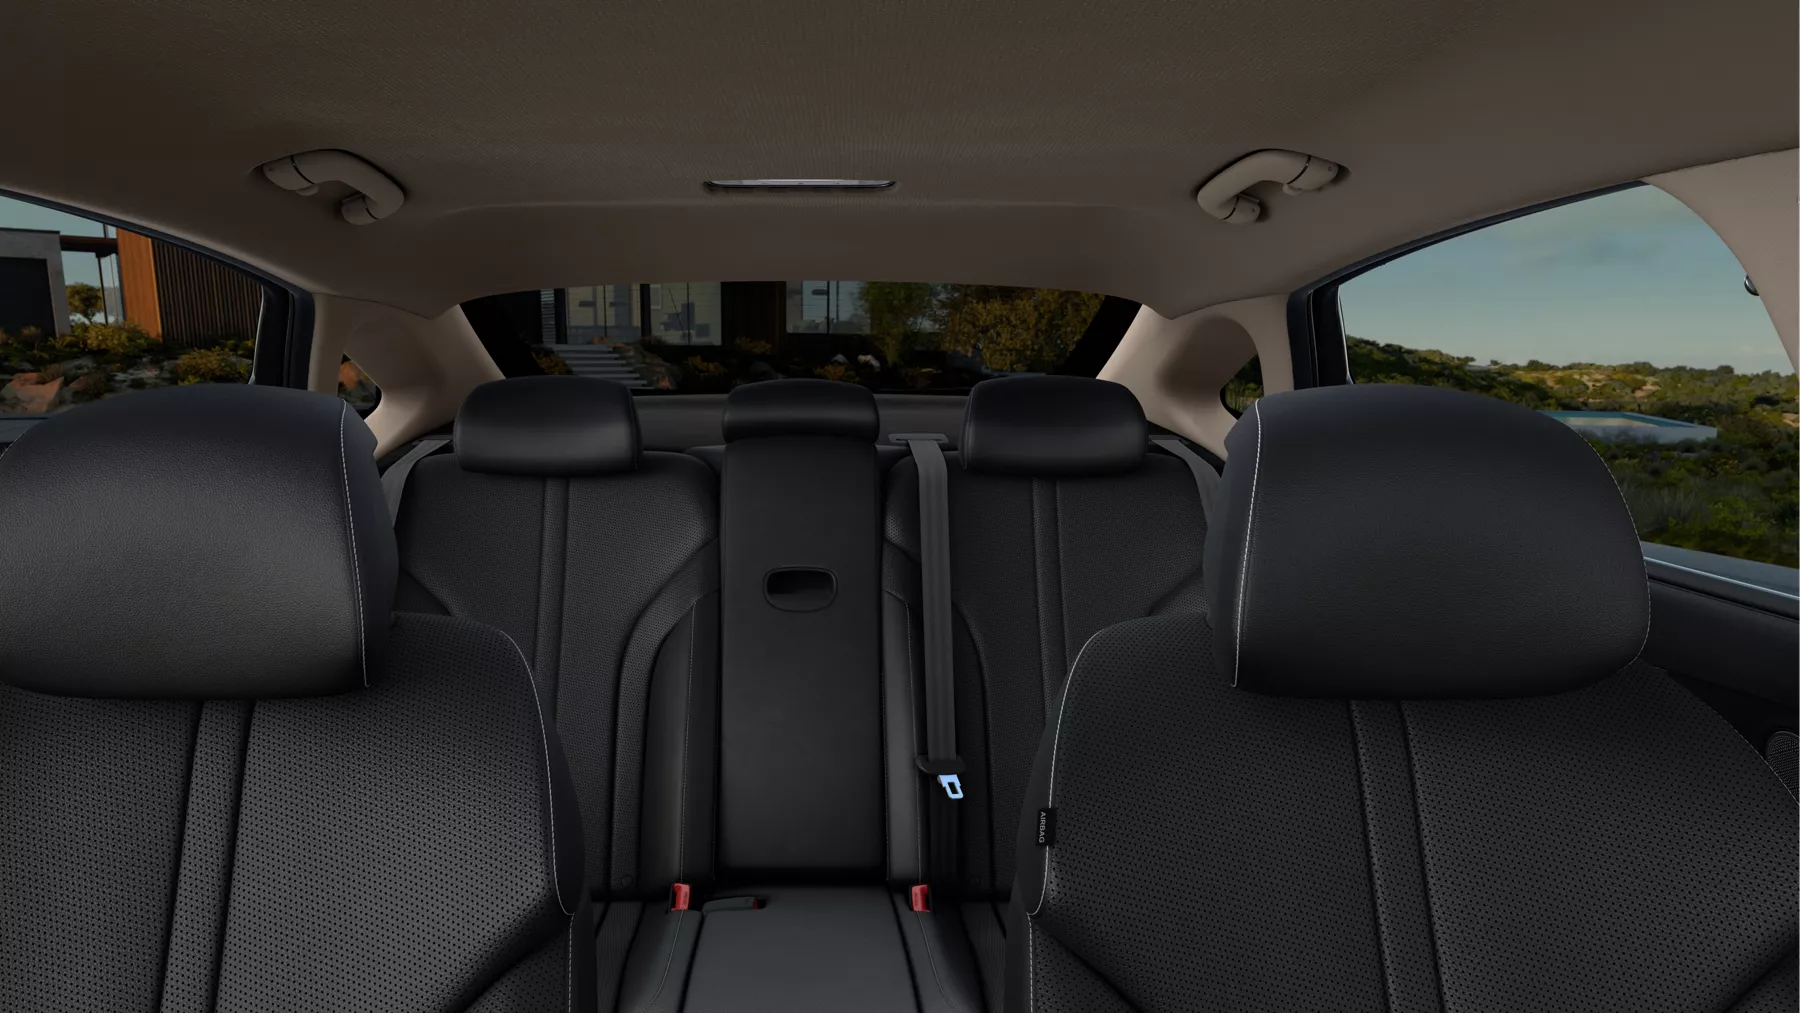 G80 front and rear seats in black color.